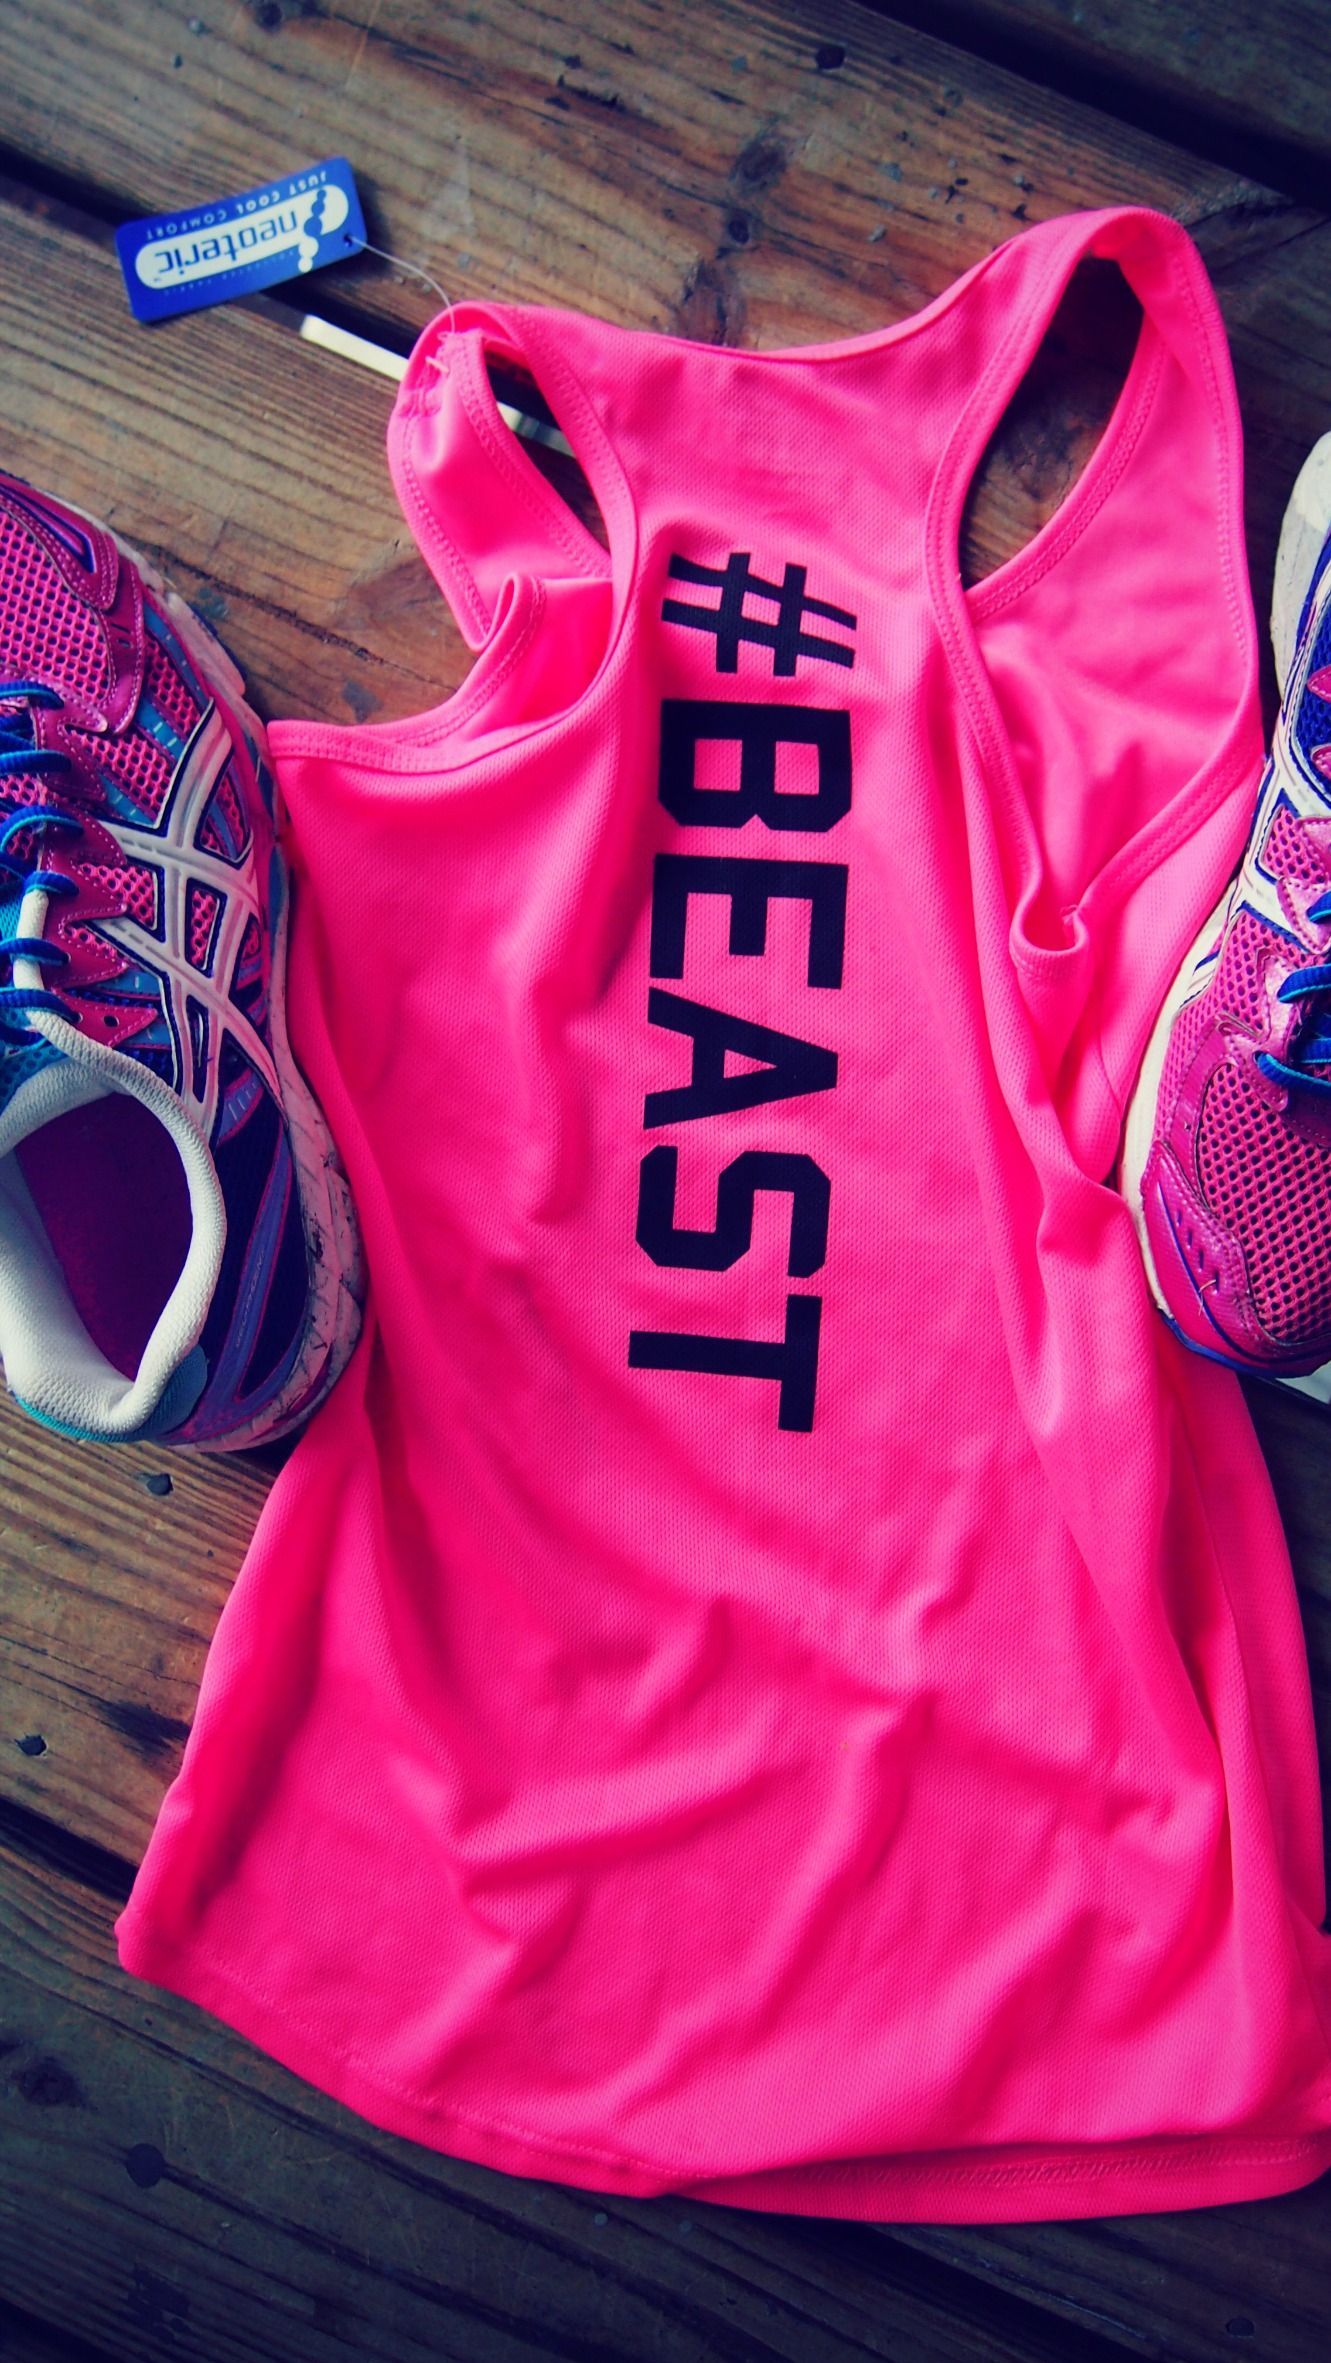 #beastmode fitness tanks! I will wear this when I get to my goal weight and can kick serious ass in a 10K.